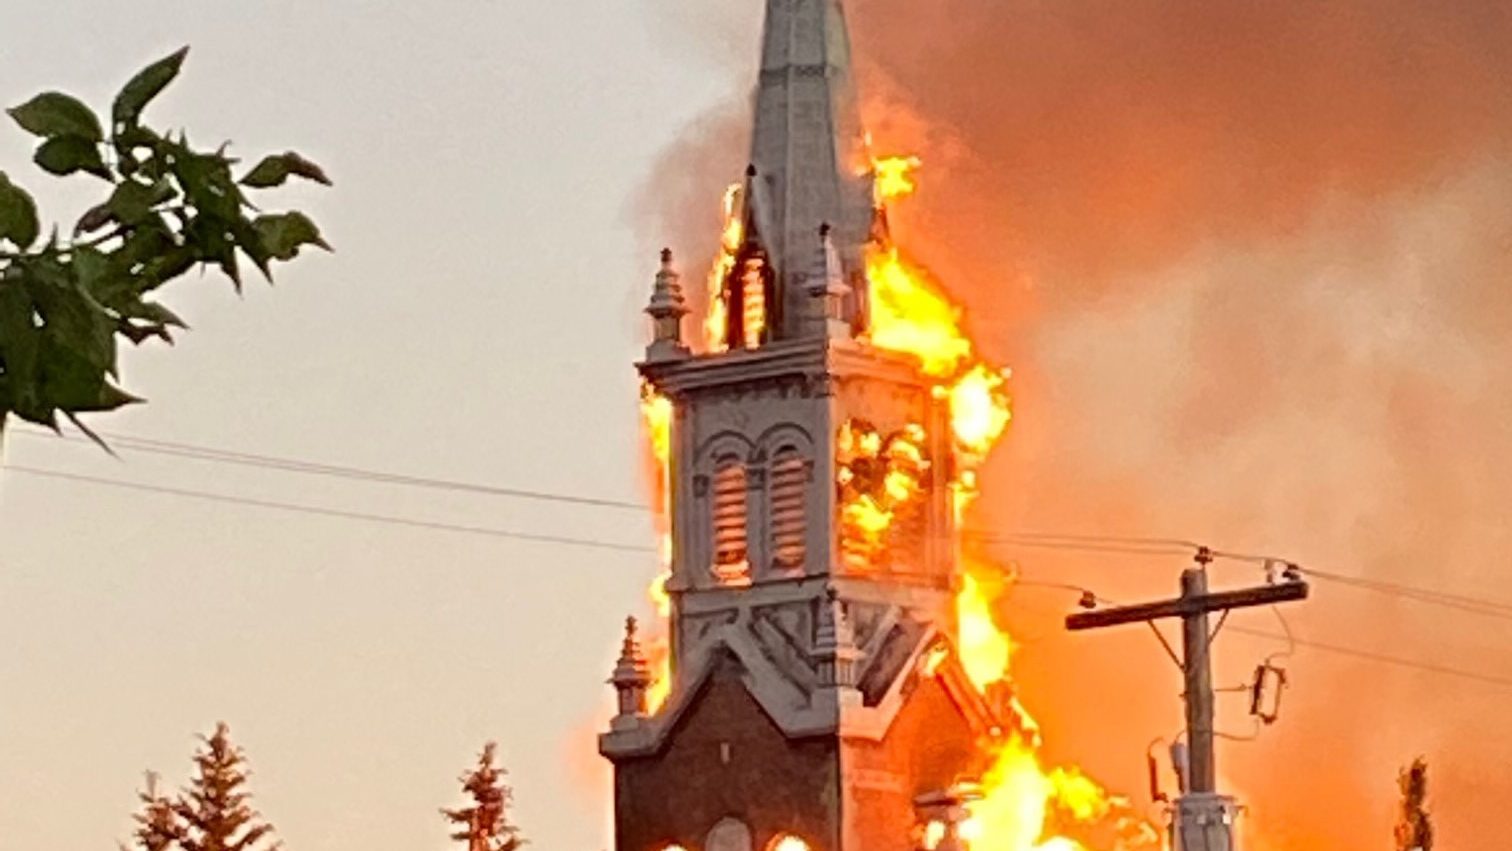 Canada: Minorities and Grassroots Movements Call for Investigation and End  of the Burning of Churches